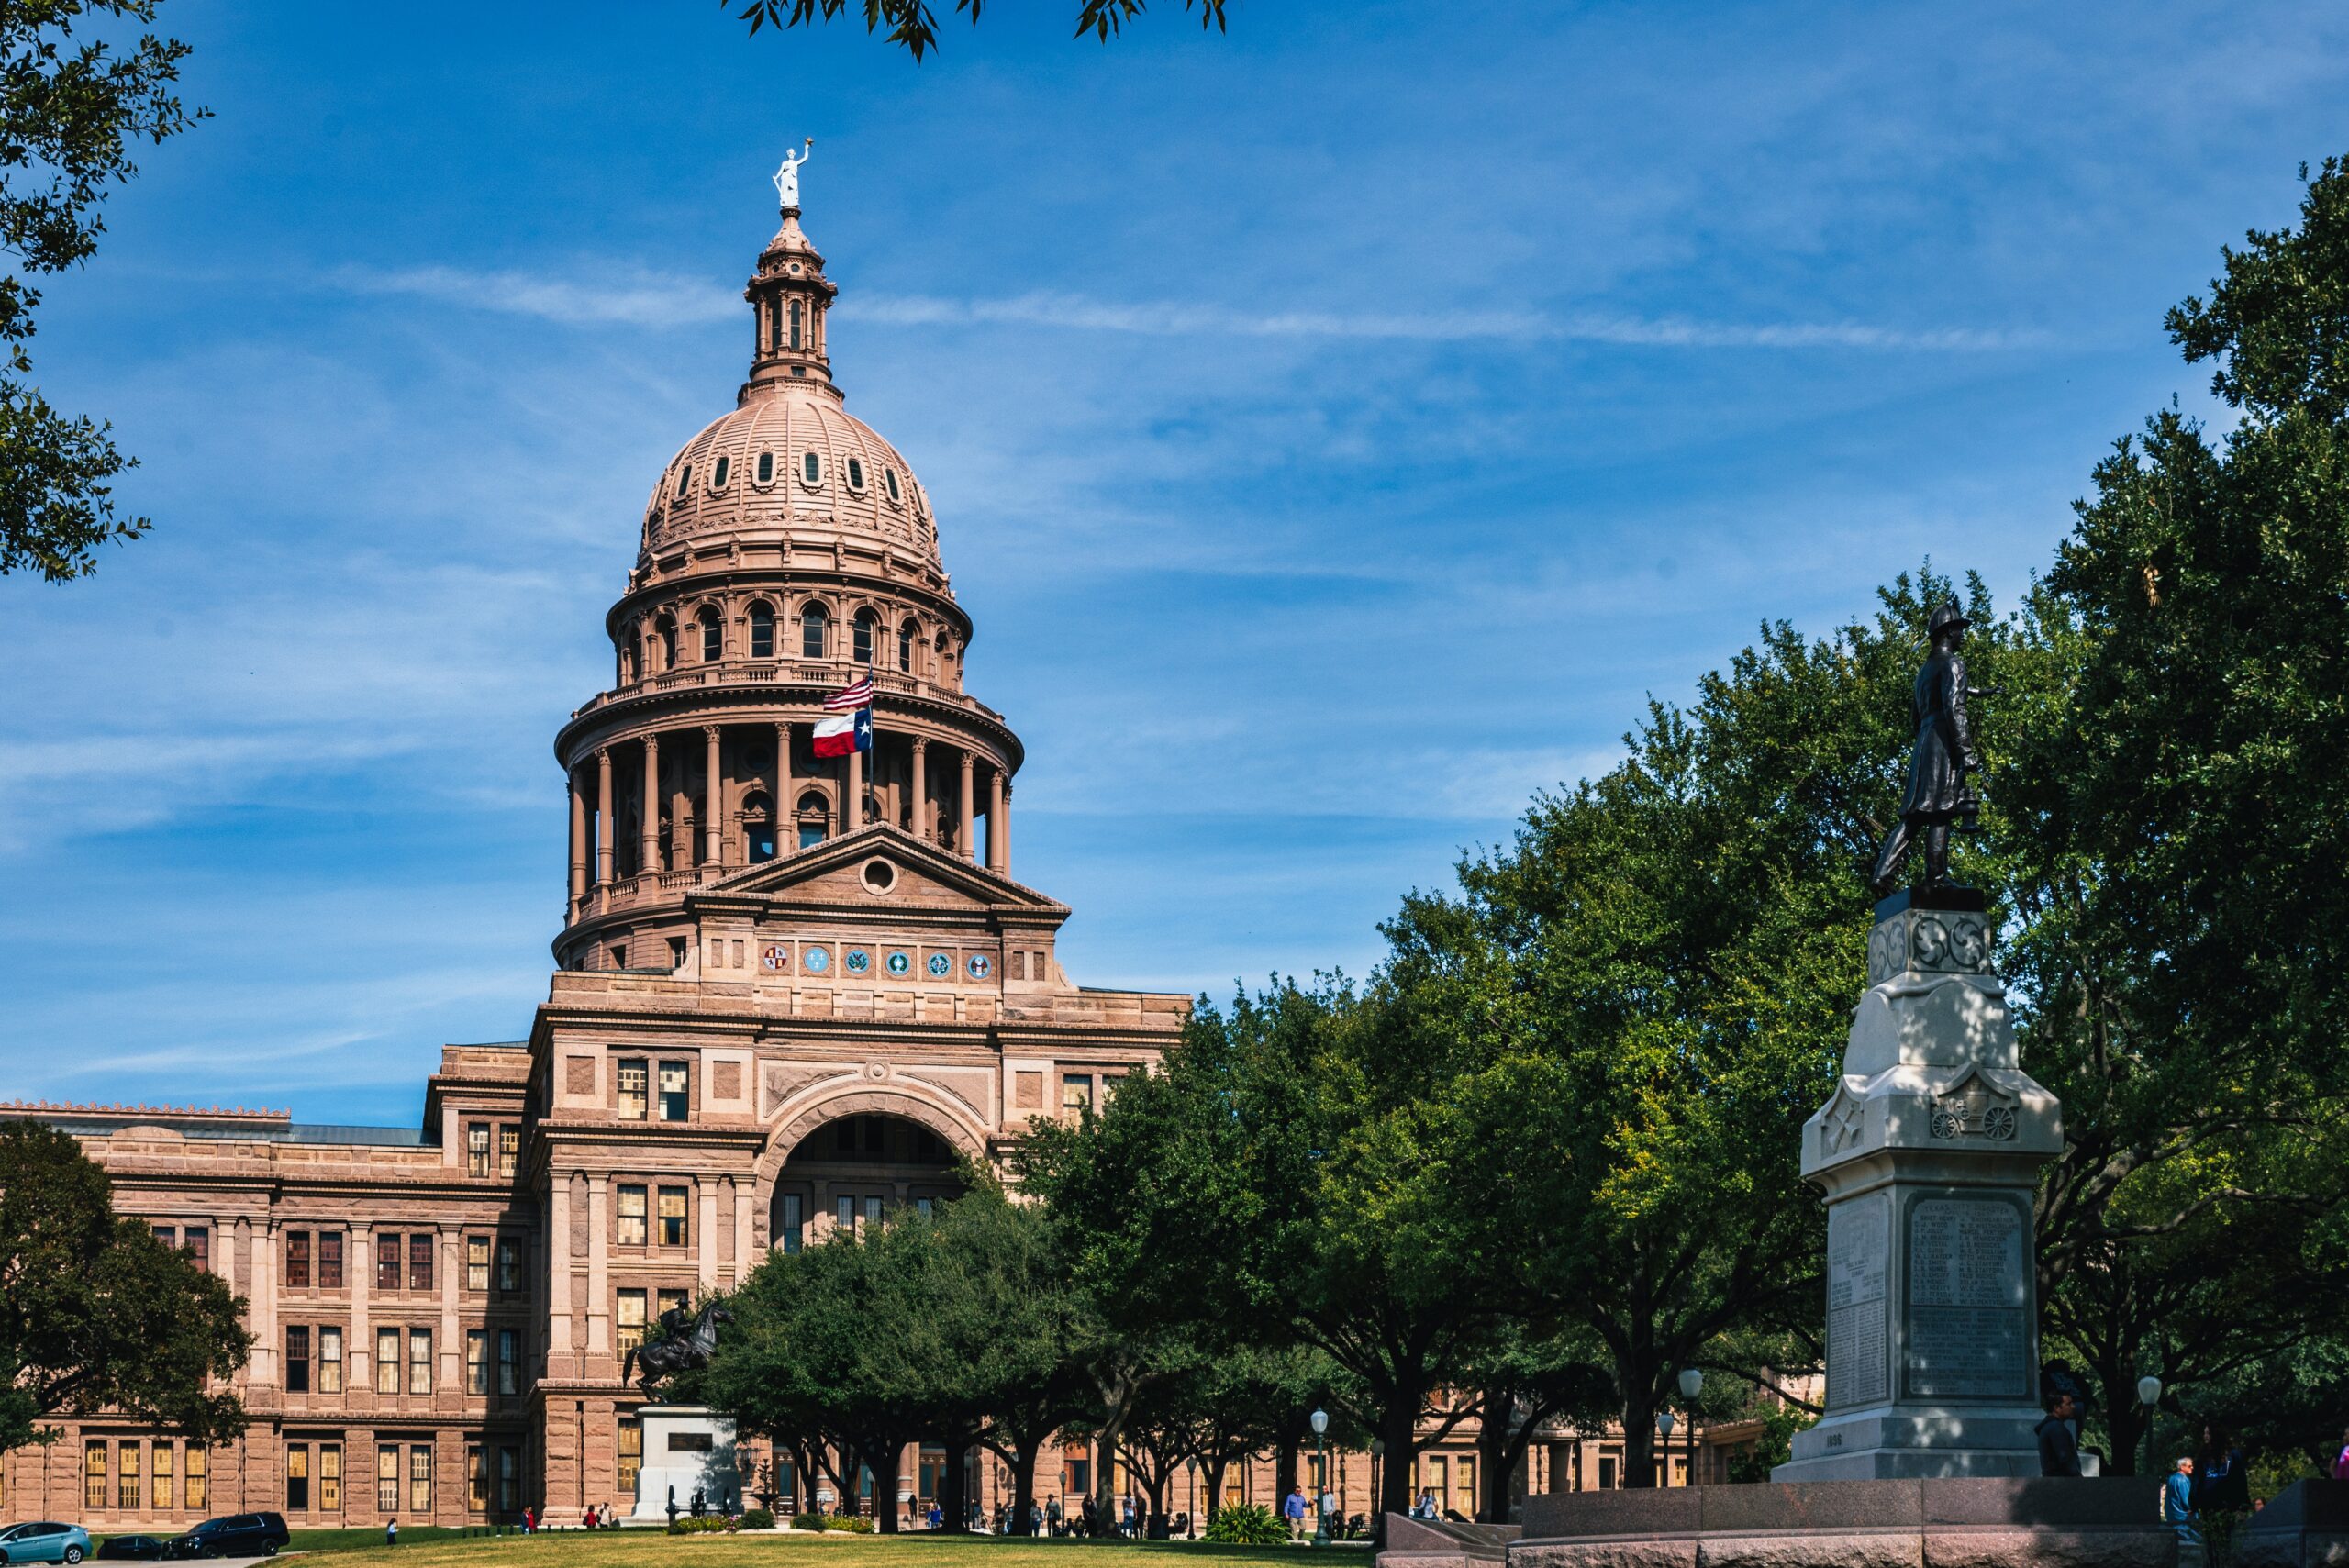 The Texas state capitol building in Austin, Texas.